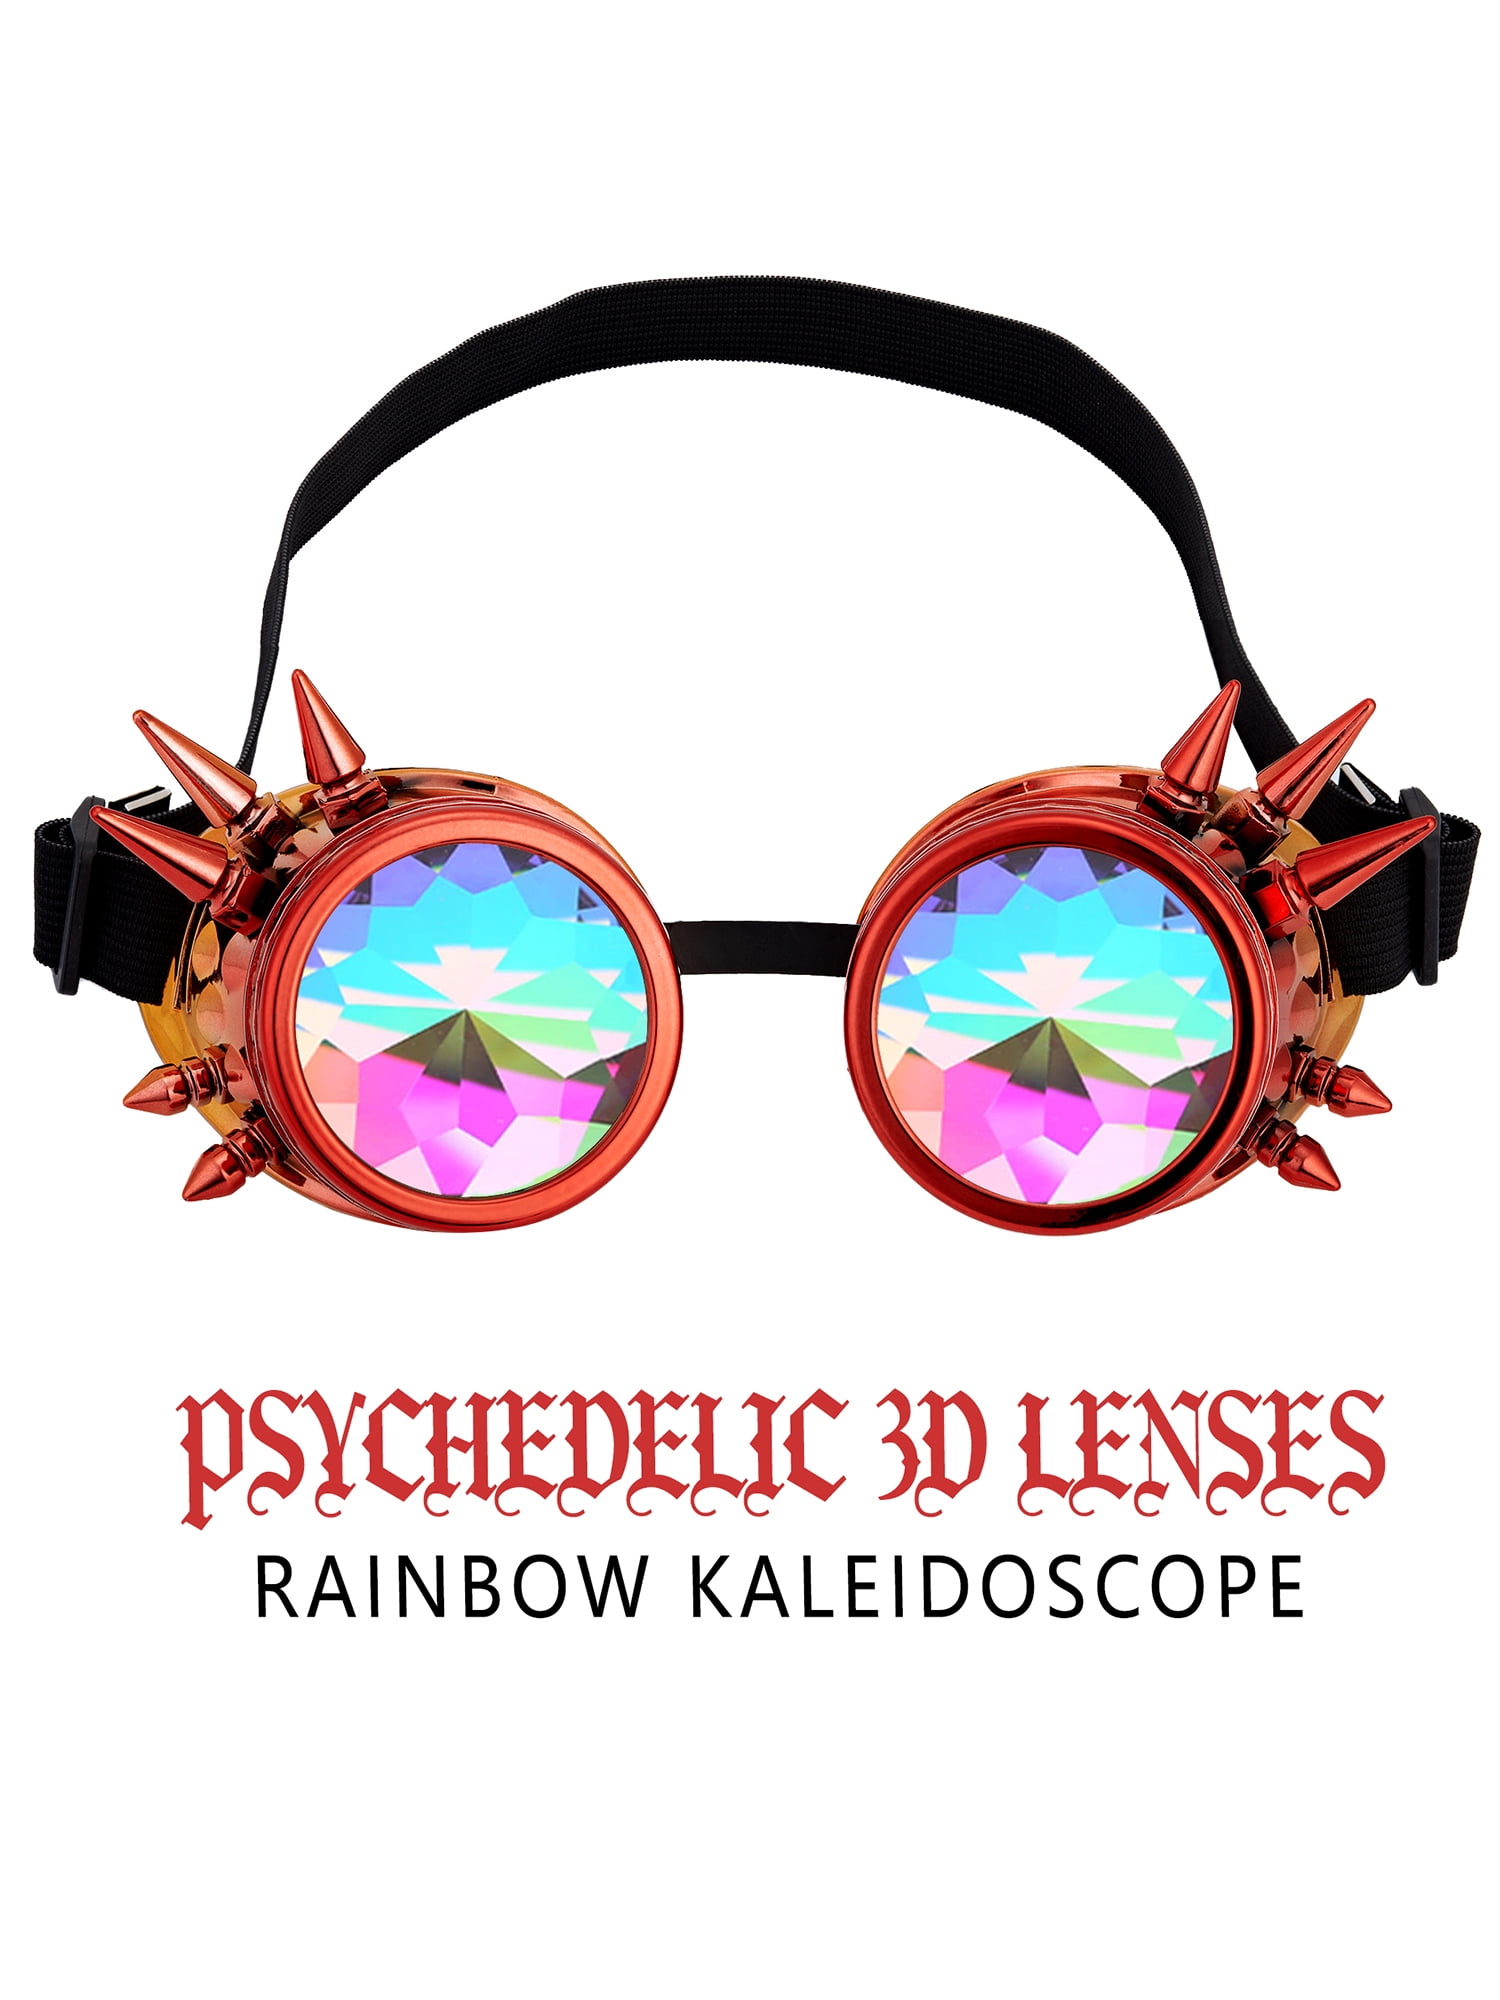 Kaleidoscope Goggles for Raves Trippy Psychedelic Steampunk Glasses with Rainbow Prism Diffraction Crystal Lenses 